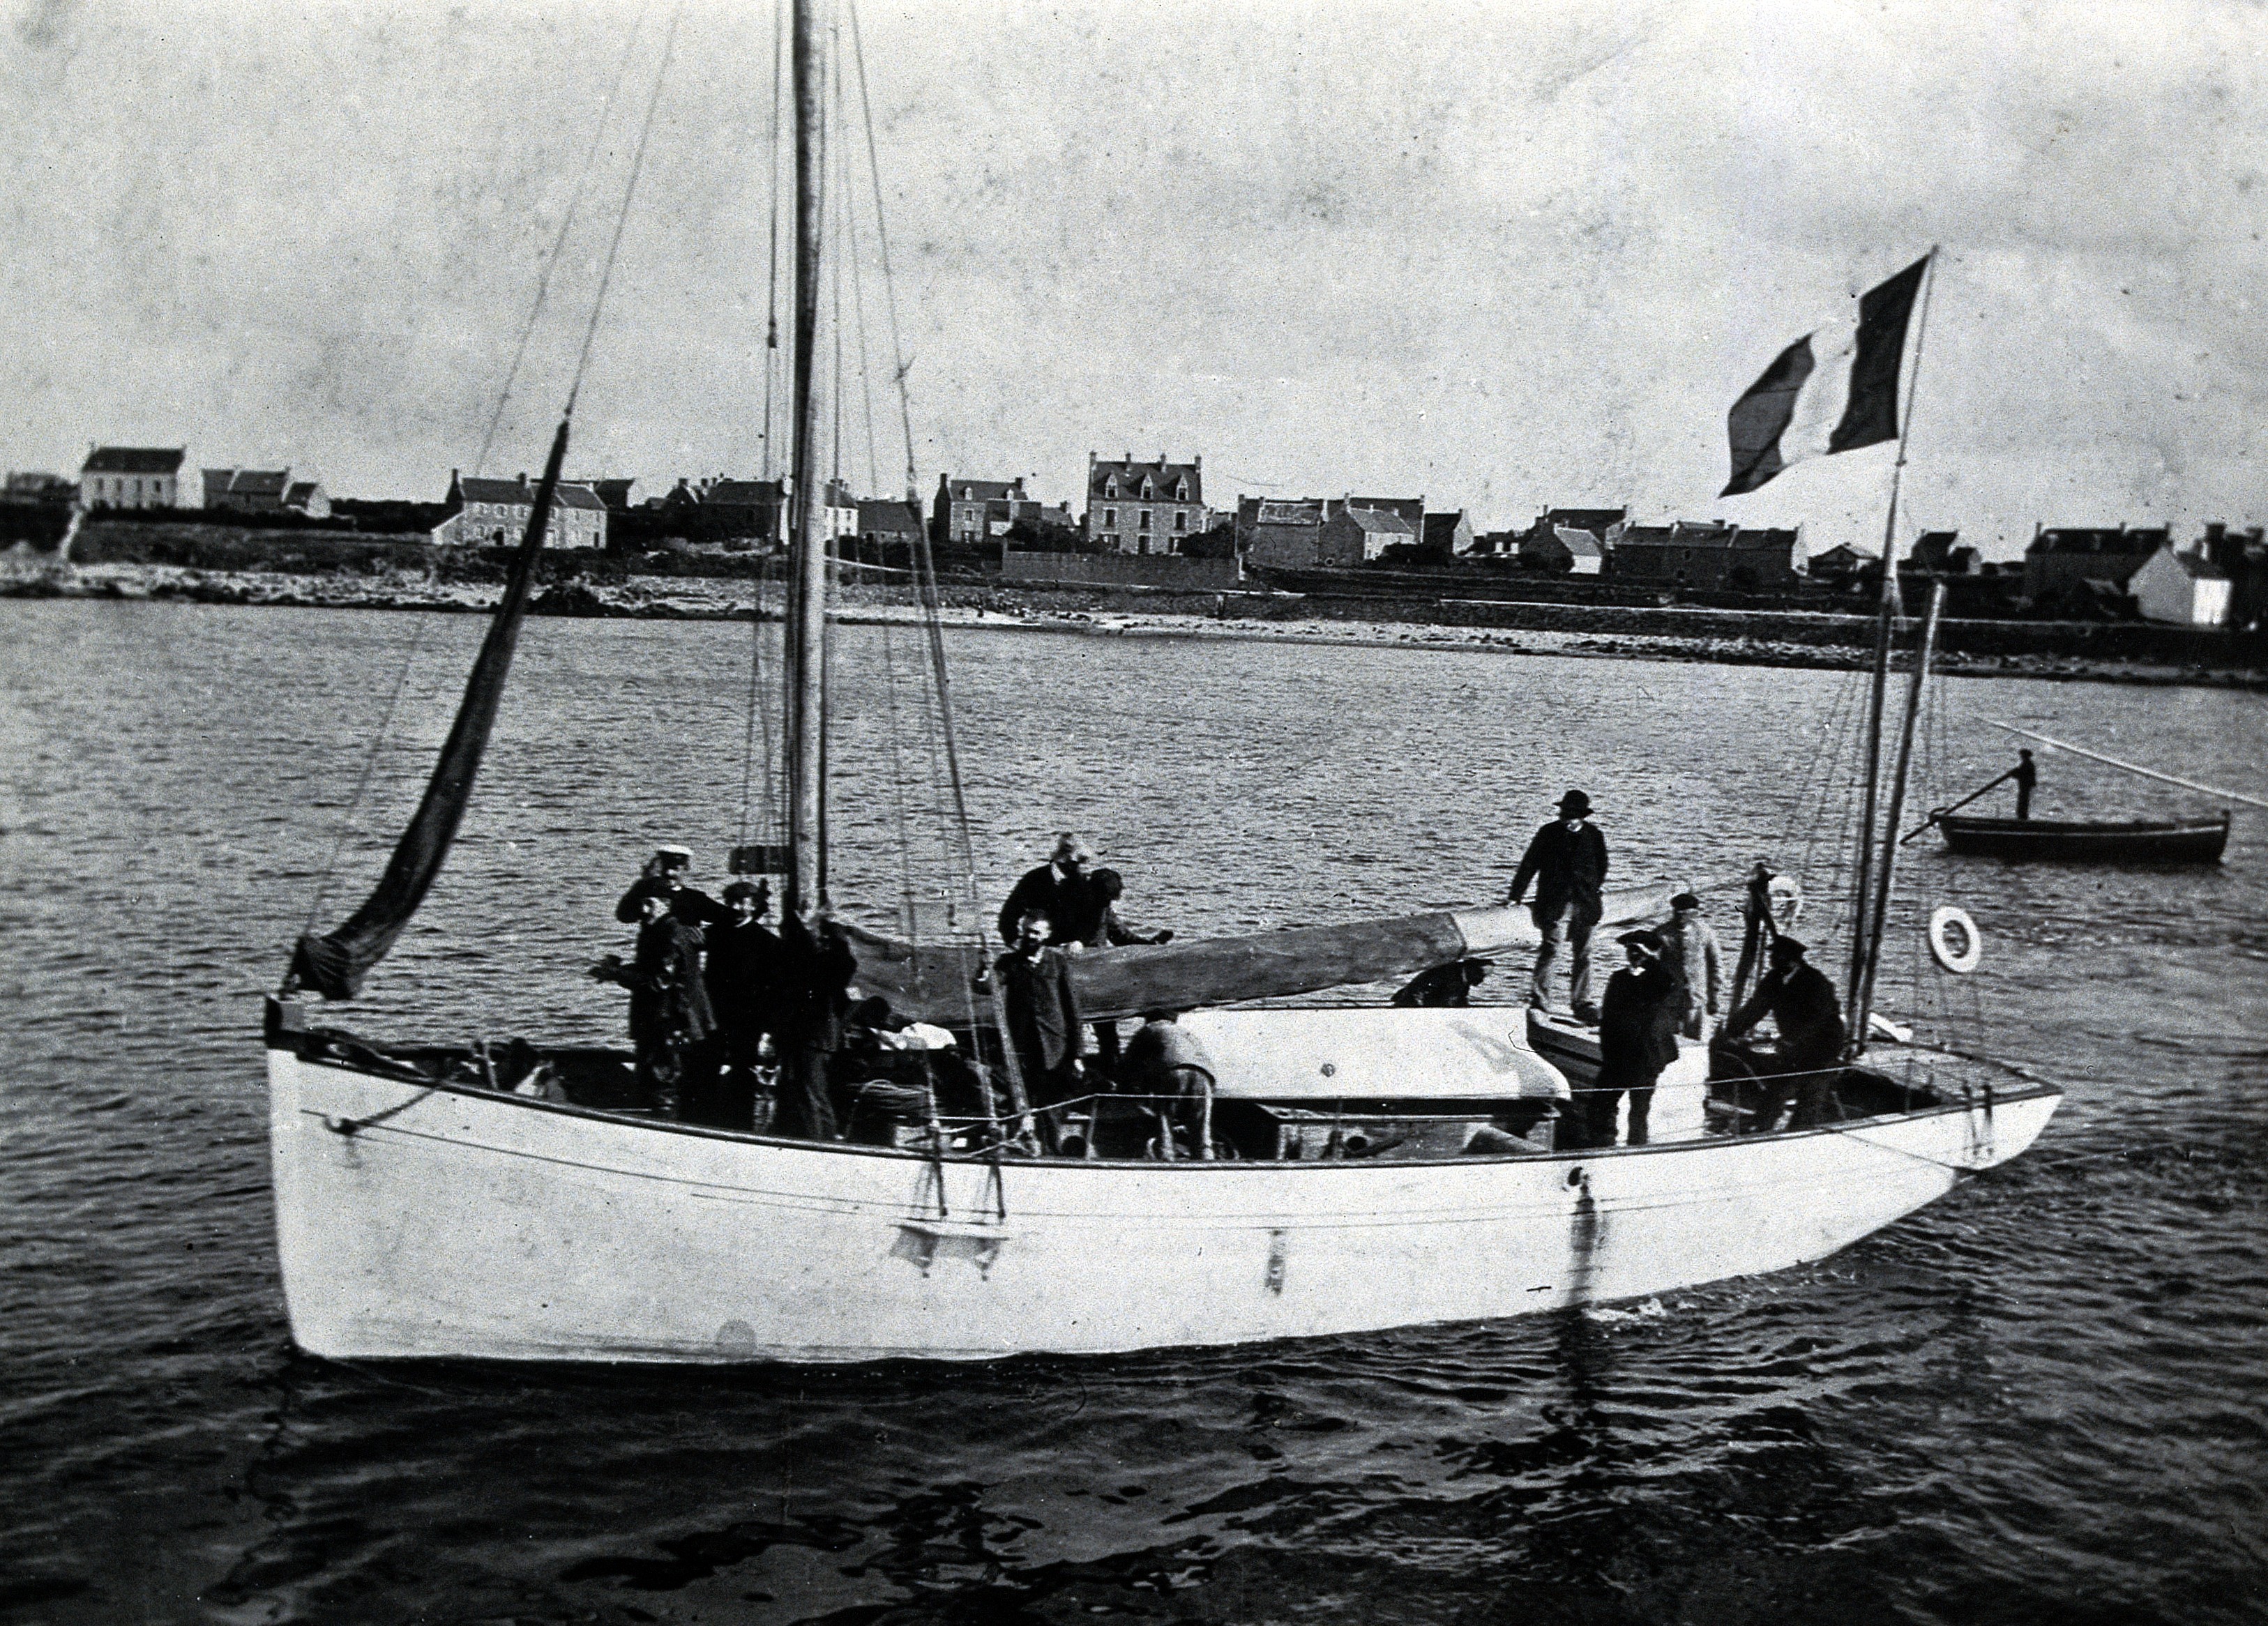 Yves Delage's laboratory boat. Photograph, 1906. Wellcome V0028216